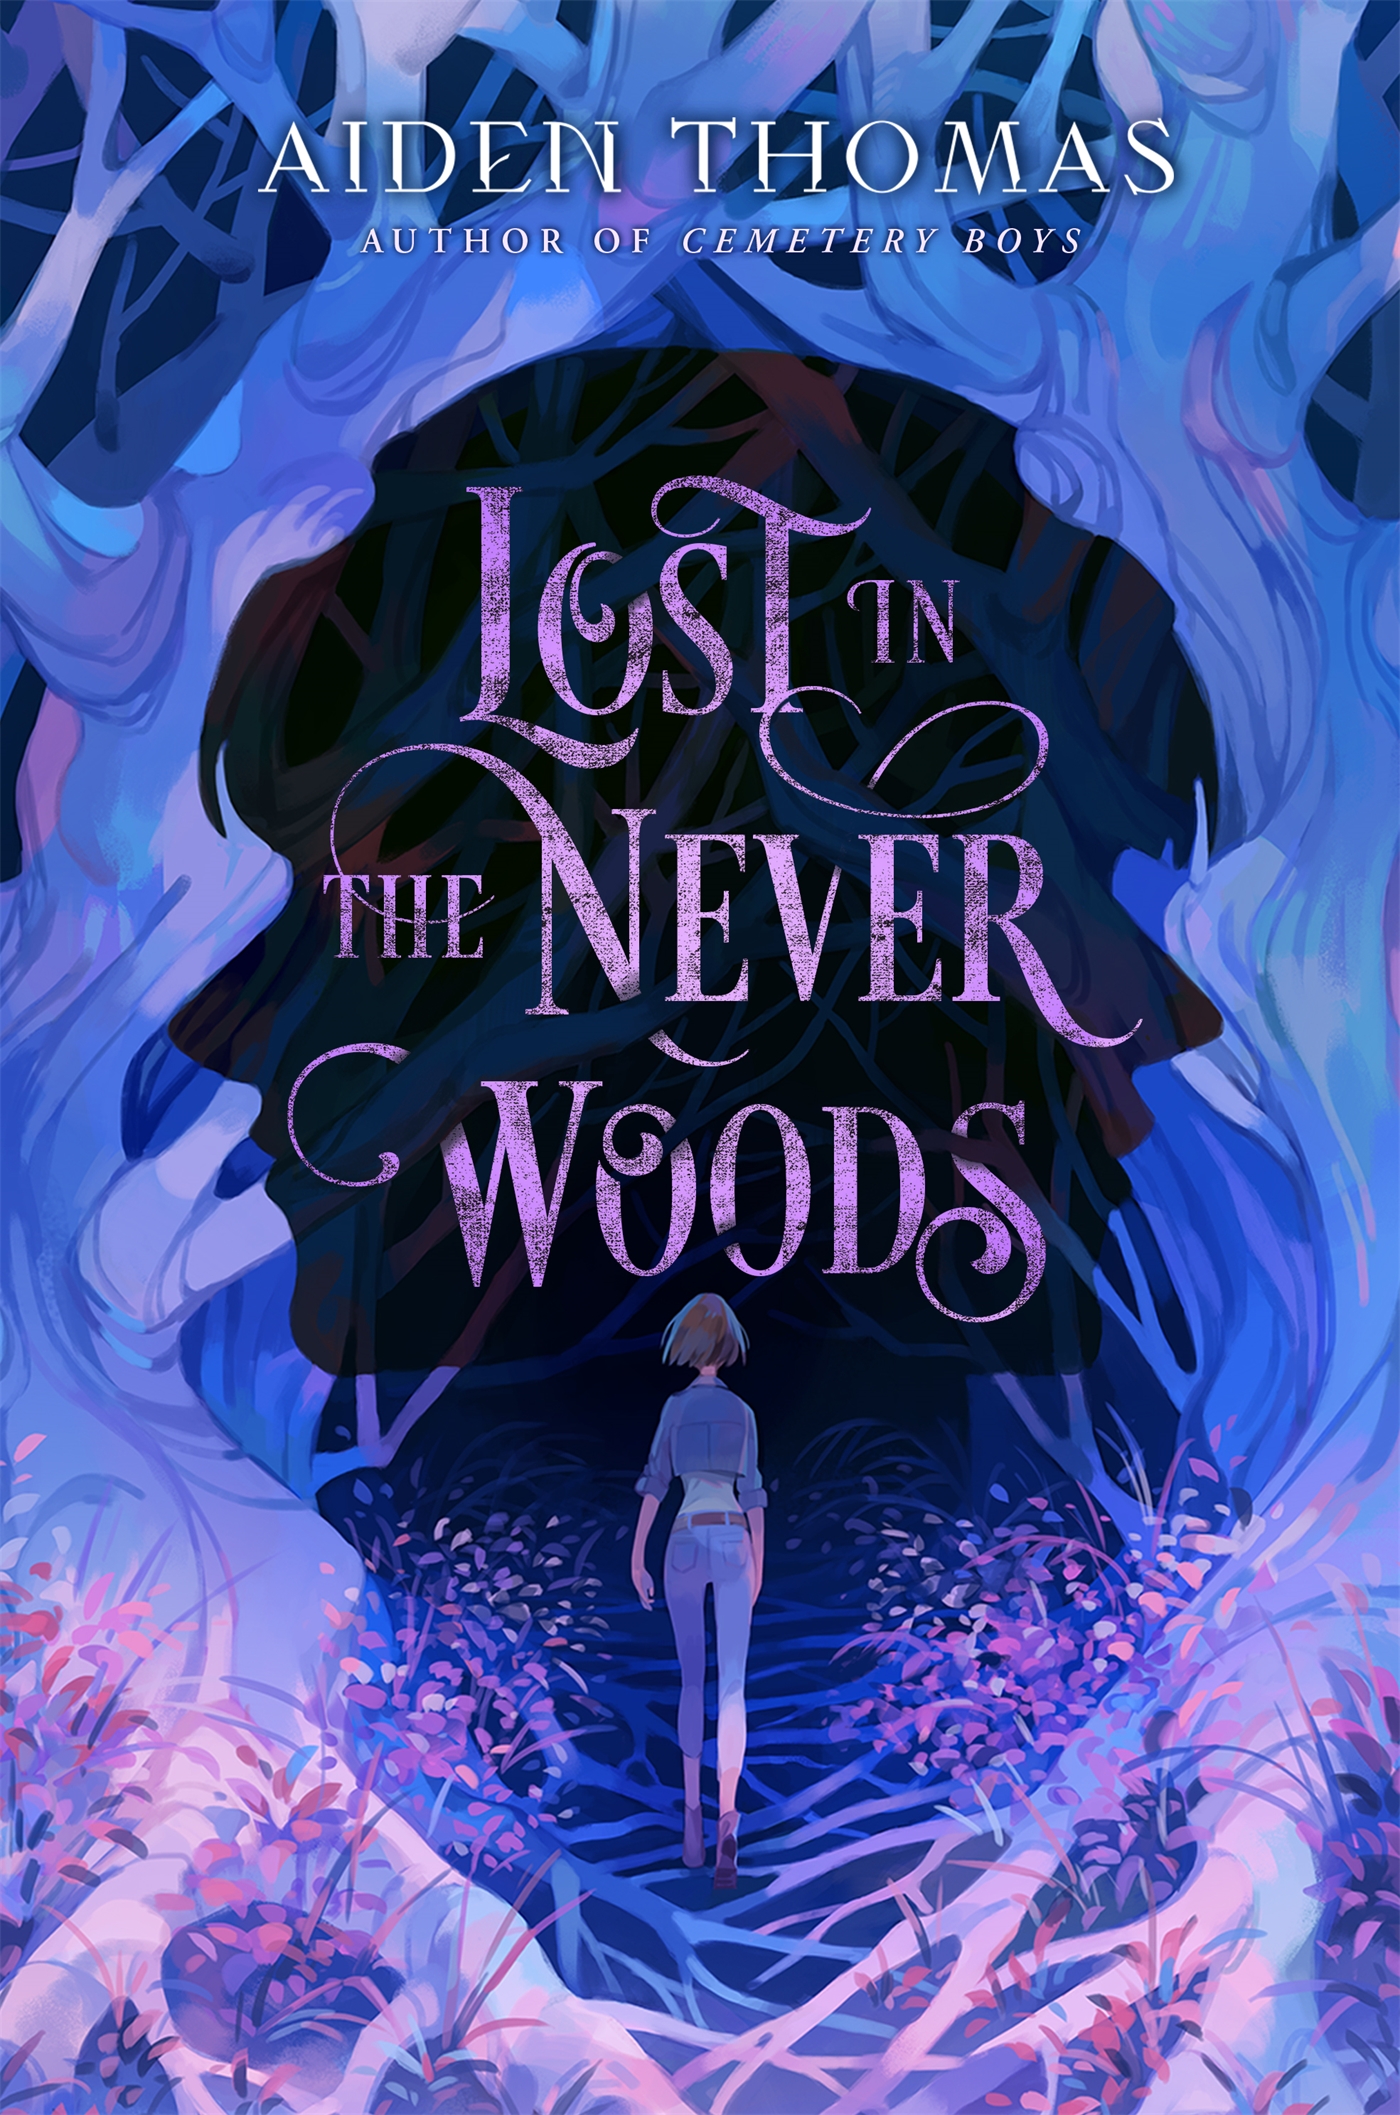 Book Lost in the Never Woods